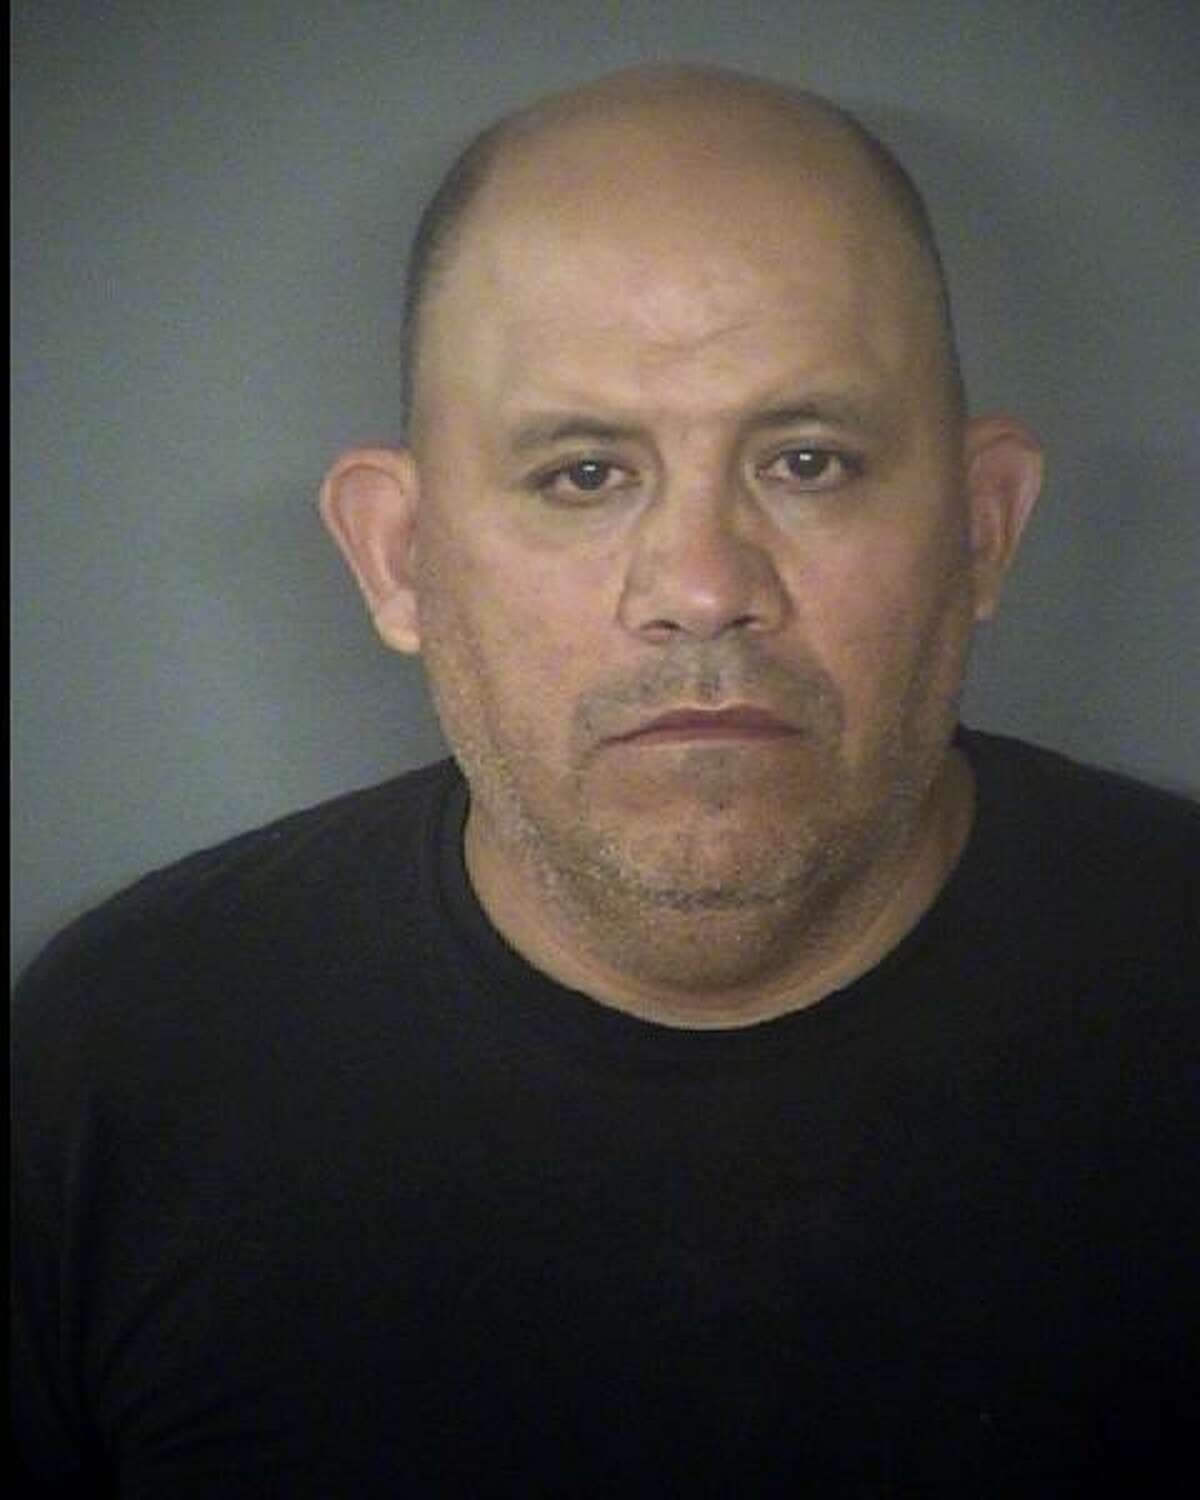 Bexar County Sheriff's Office deputy Jose Nunez is seen in a June 17, 2018 booking mug provided by the Bear County Sheriff's office. Nunez, a 10-year-employee of the sheriff's department, was charged with super aggravated sexual assault of a child after a 4-year-old girl told her mother of the alleged assault. Nunez also allegedly threatened the child's mother, who is an undocumented immigrant, with deportation if she told officials about the abuse.